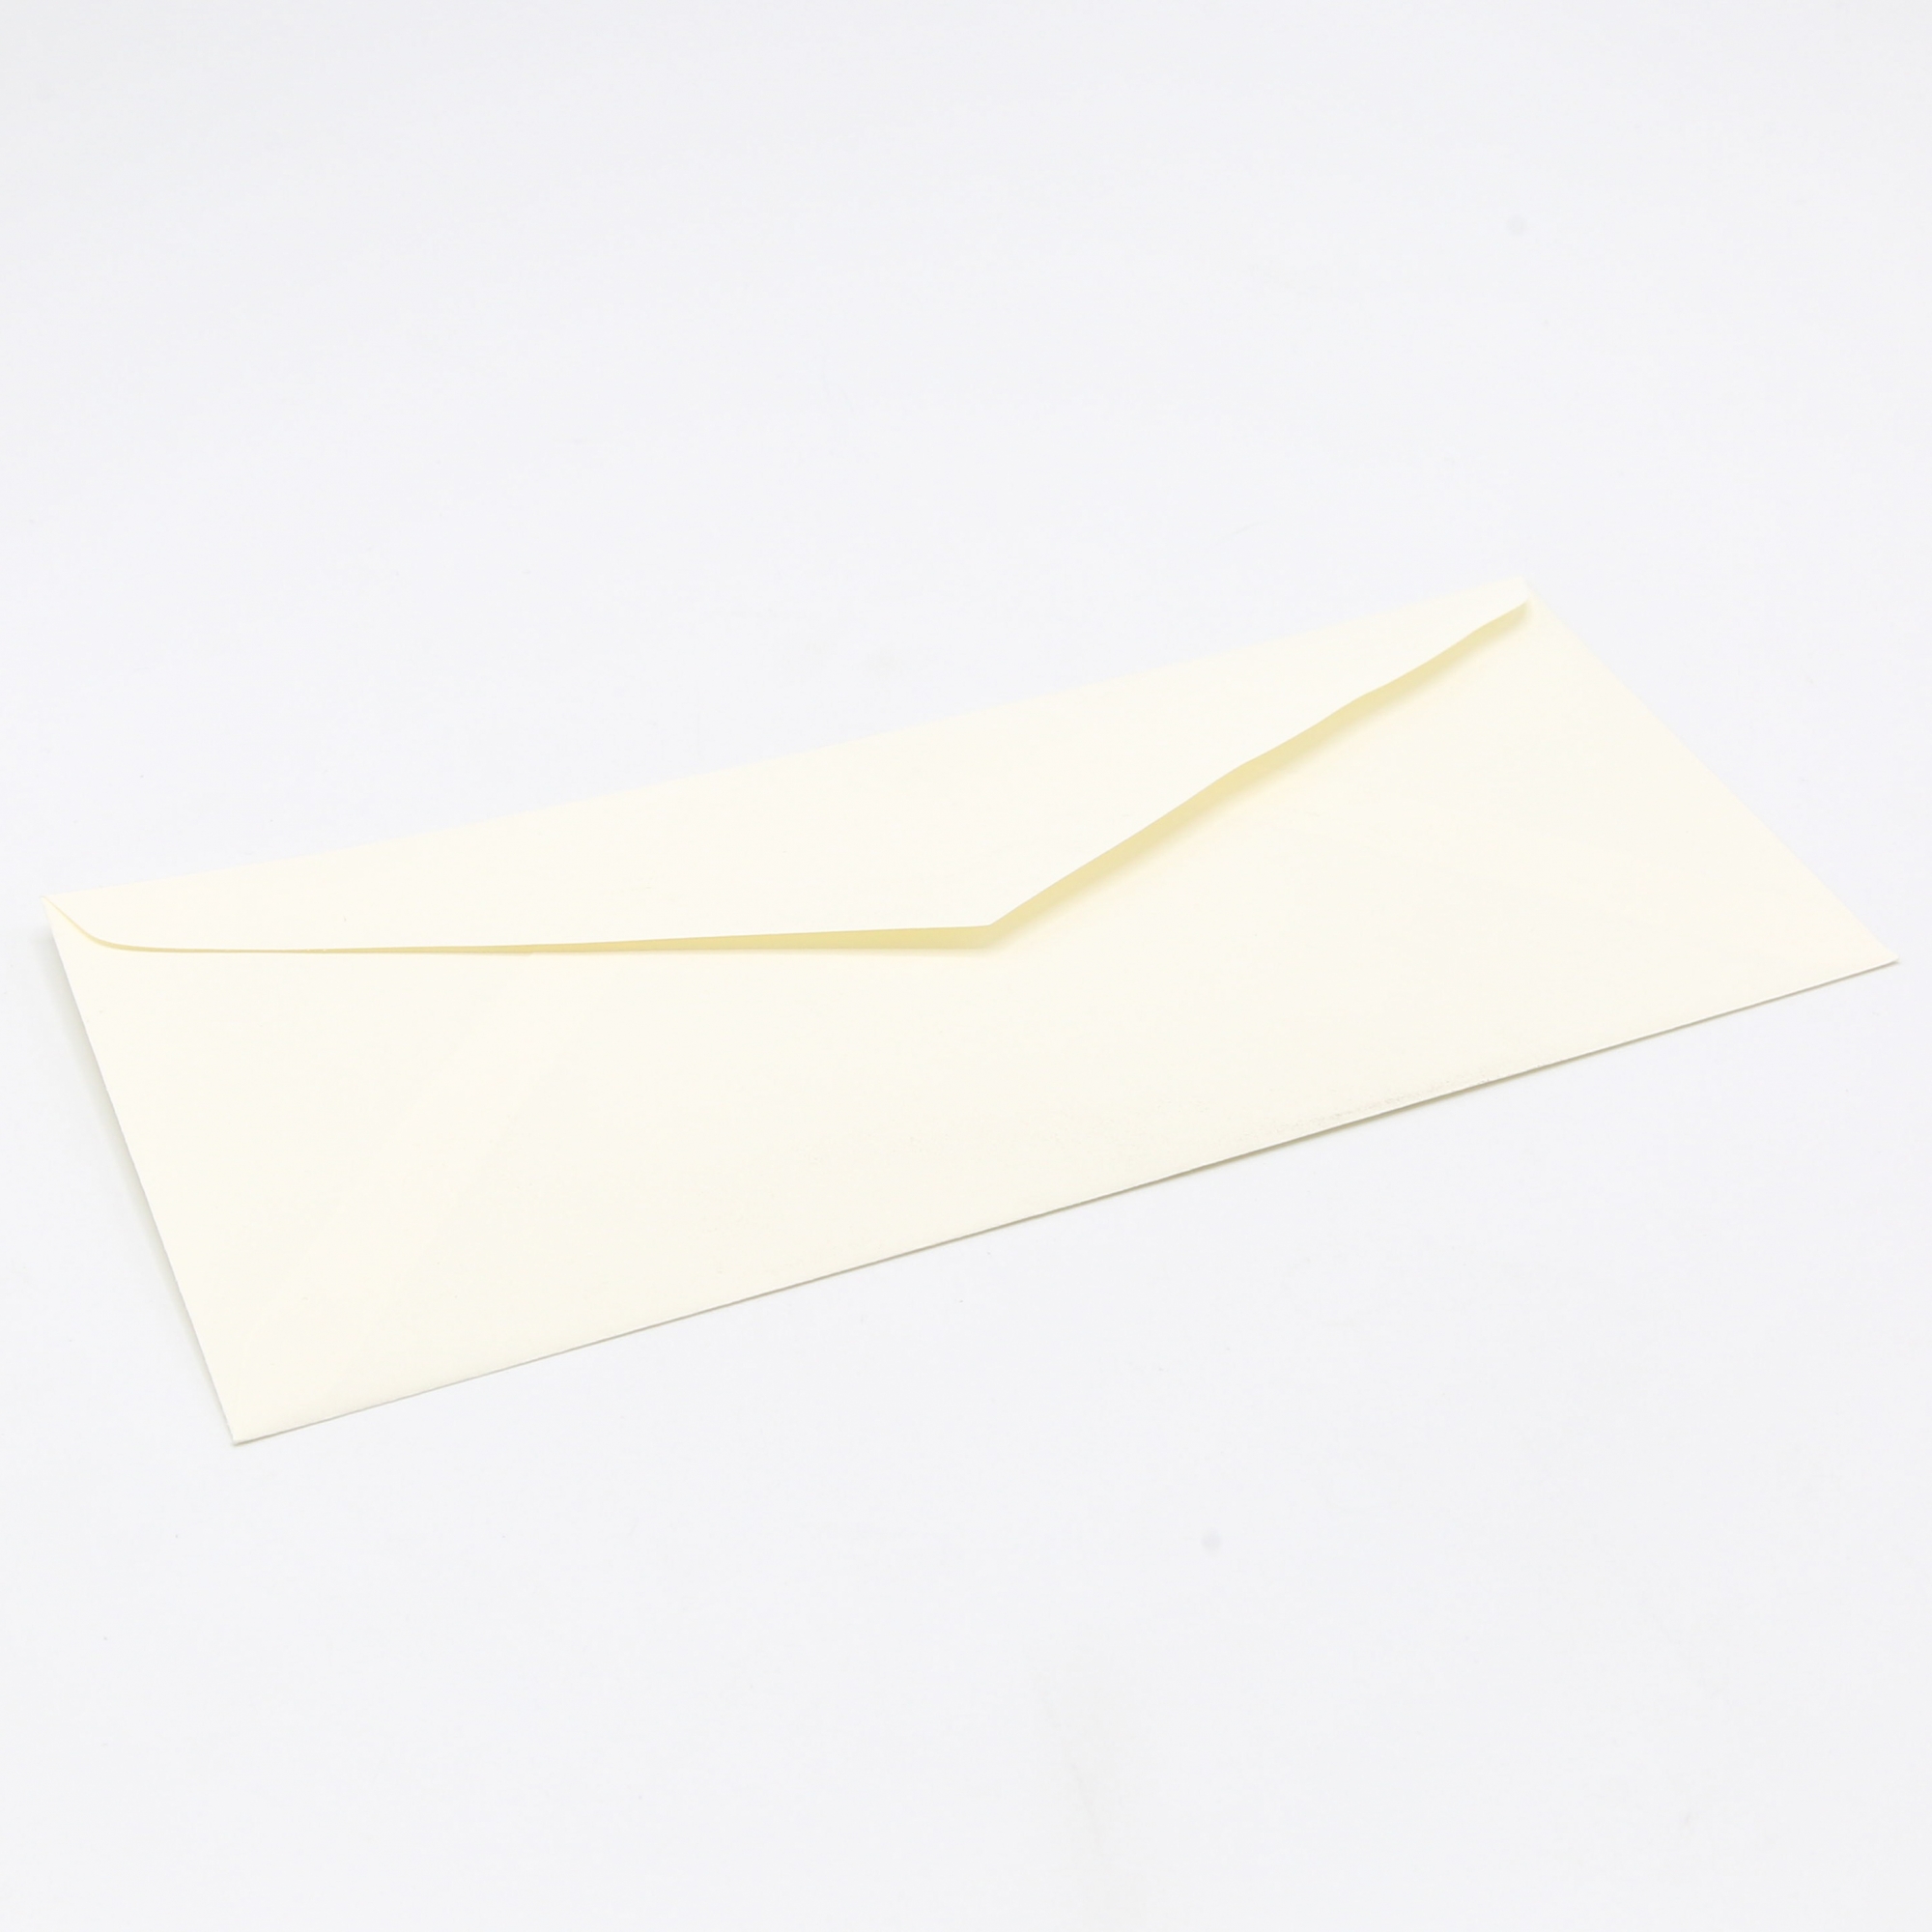 baronial ivory linen - classic® linen papers - Neenah Packaging